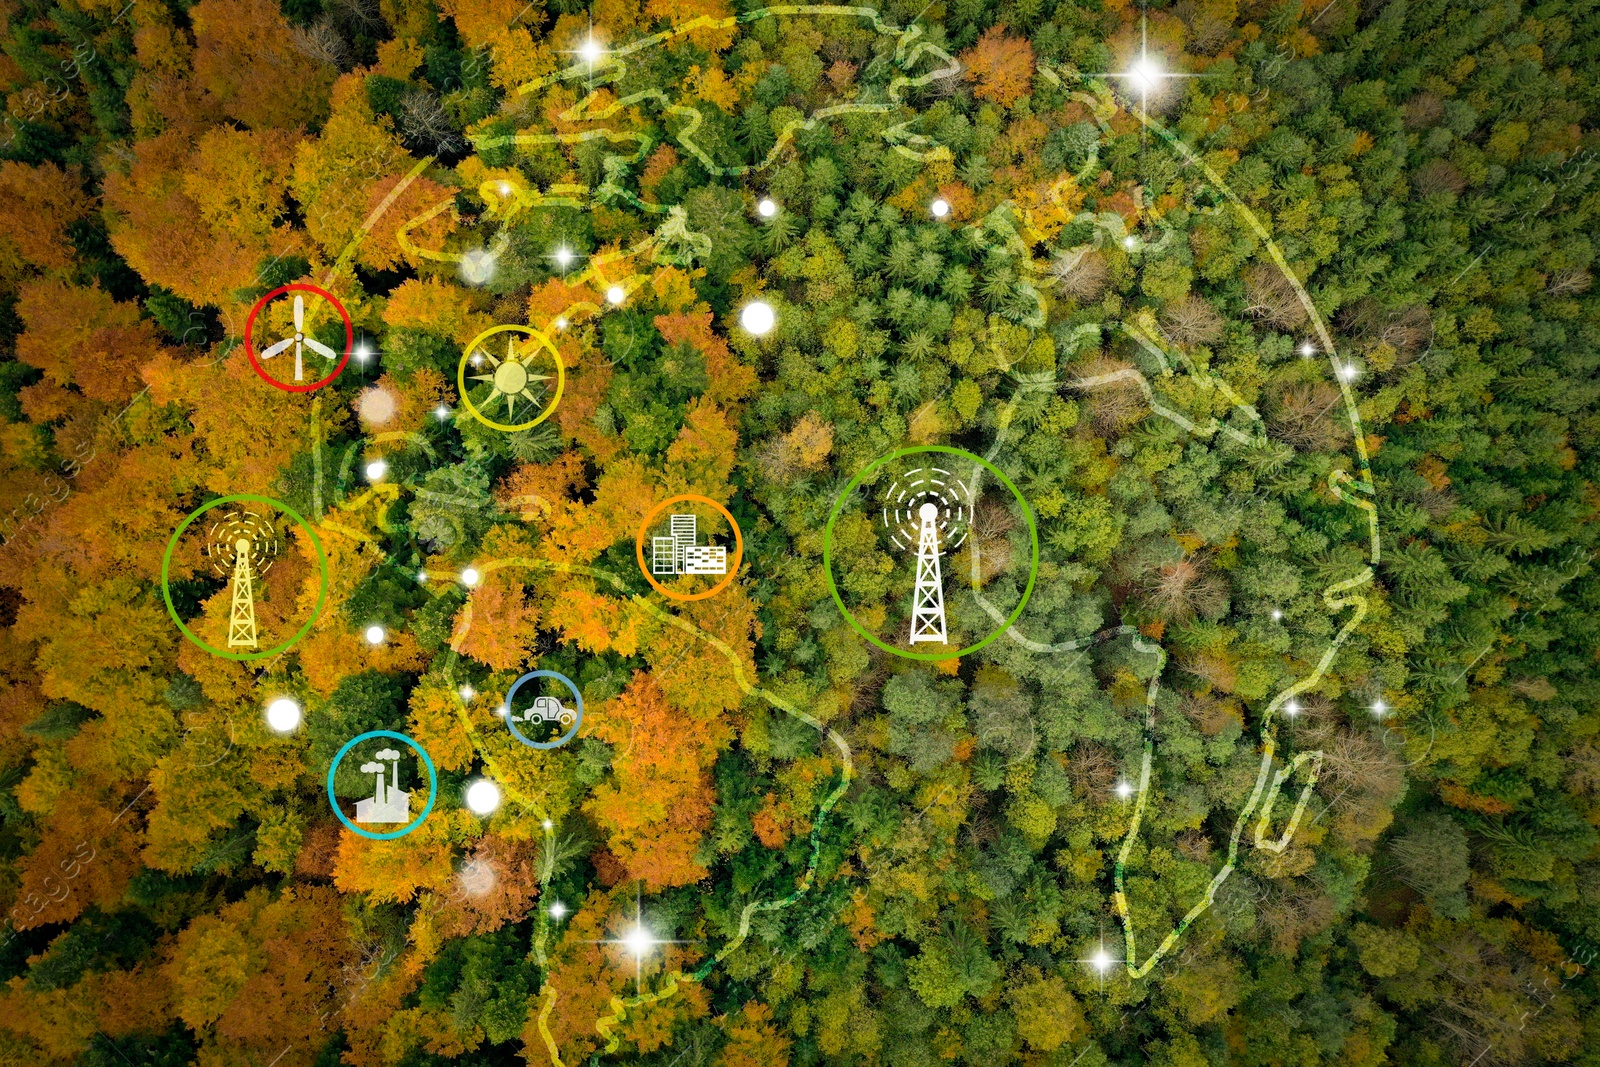 Image of Digital icons of sustainable development goals and view of beautiful forest